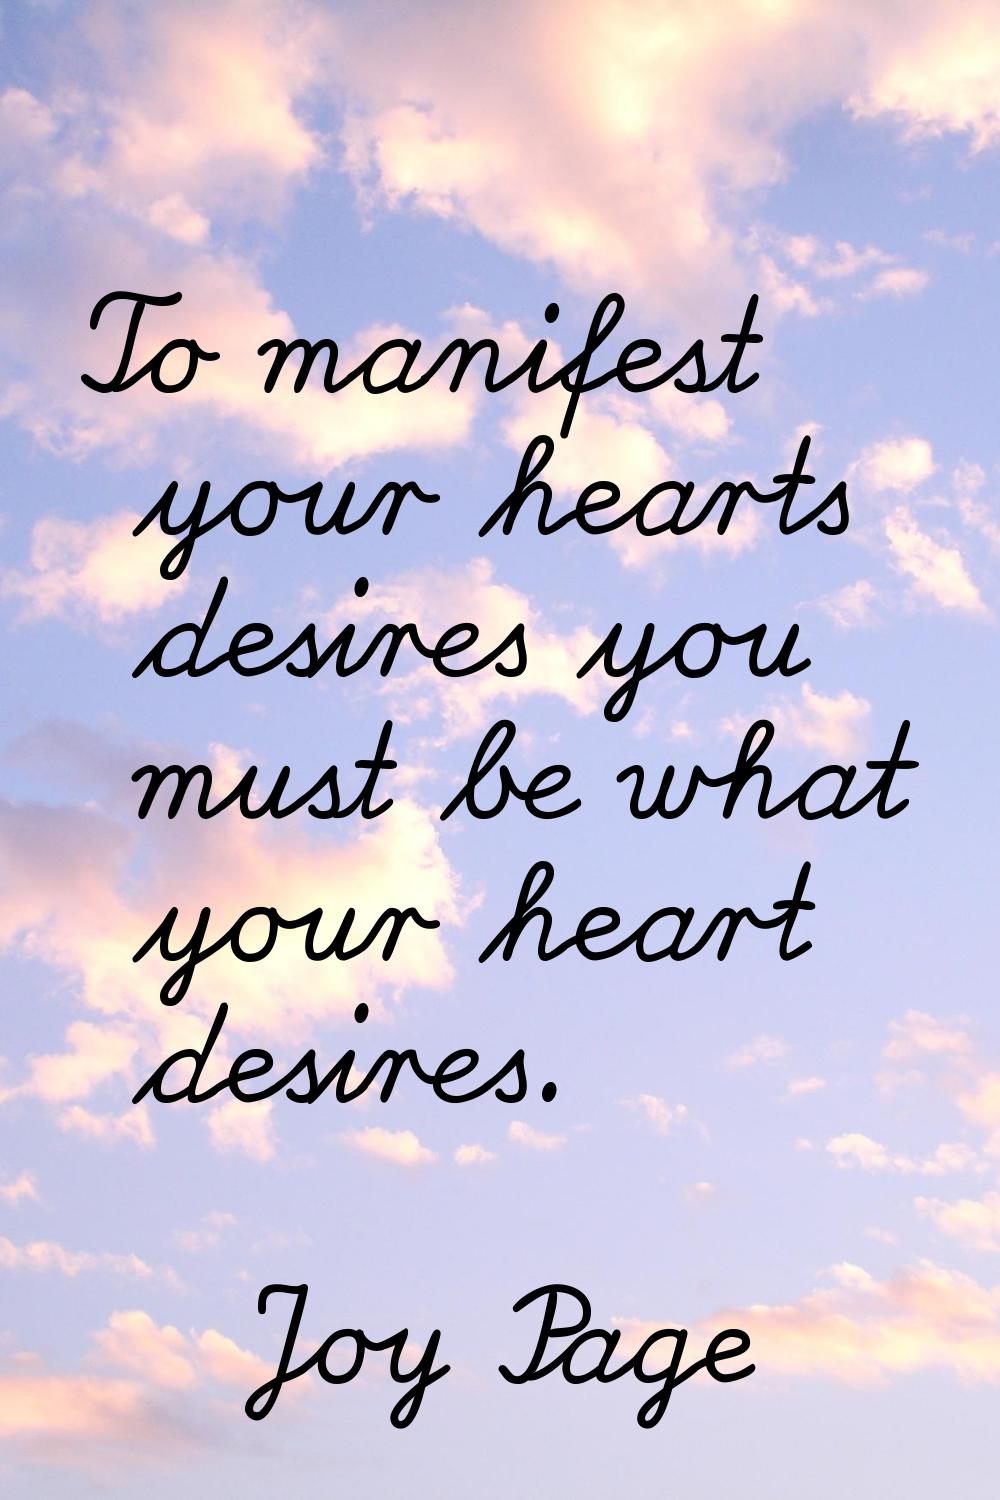 To manifest your hearts desires you must be what your heart desires.